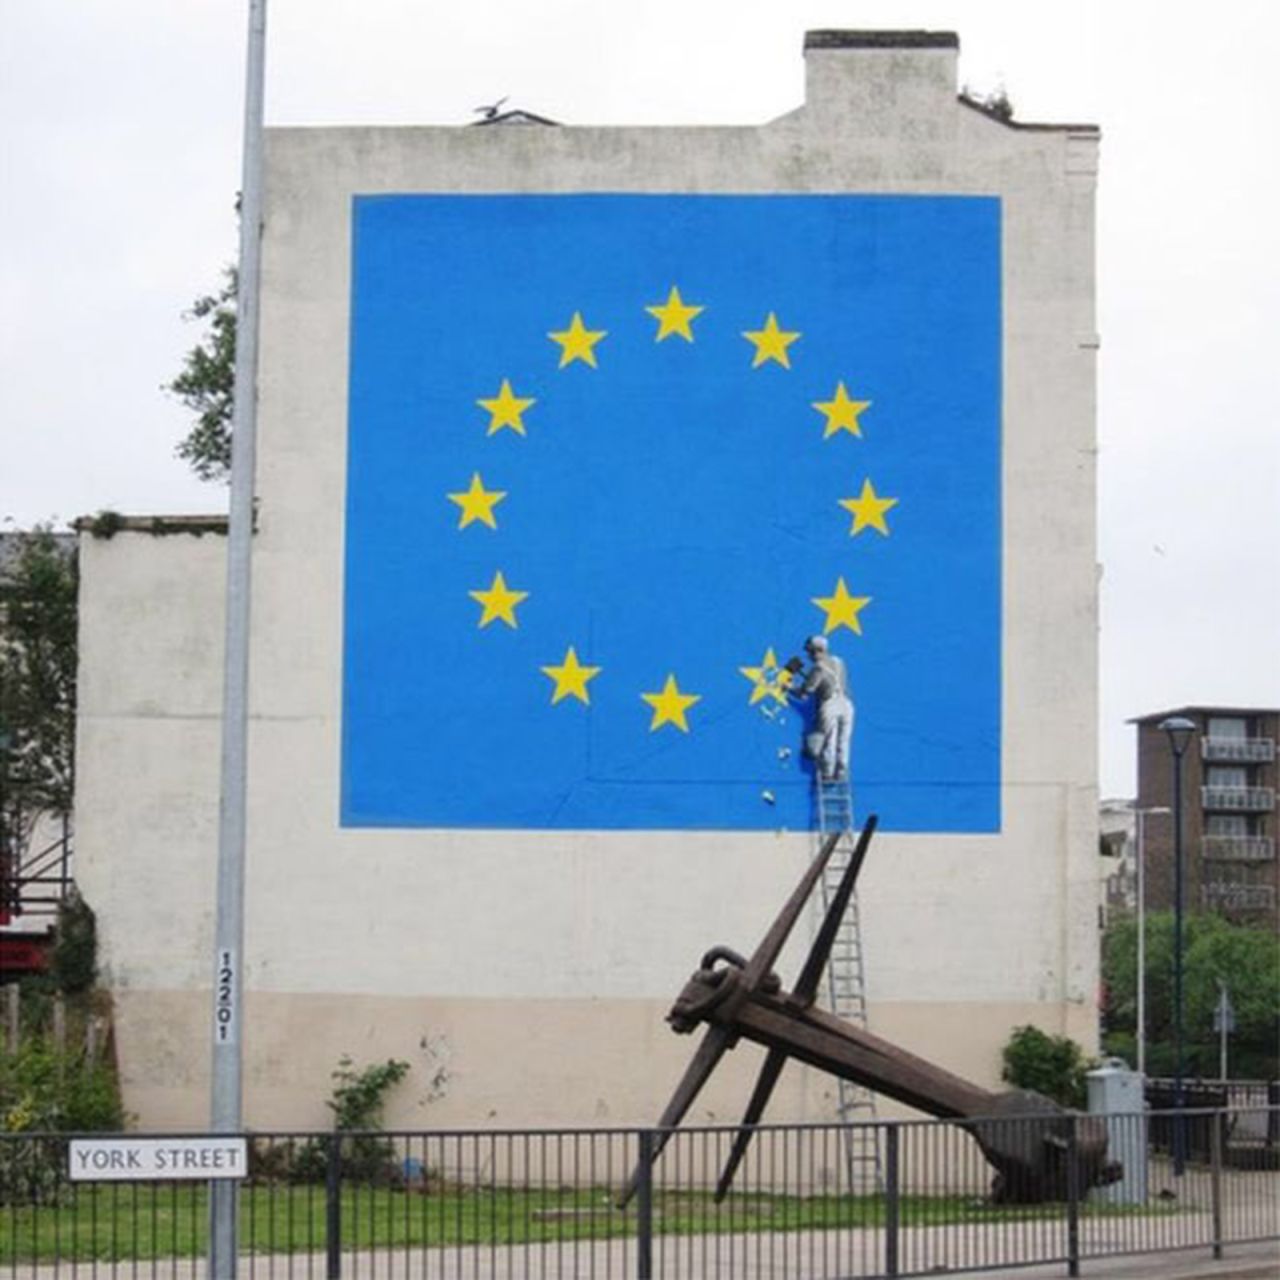 Banksy's Brexit mural depicted a workman chipping away at one of the stars in the European Union flag.